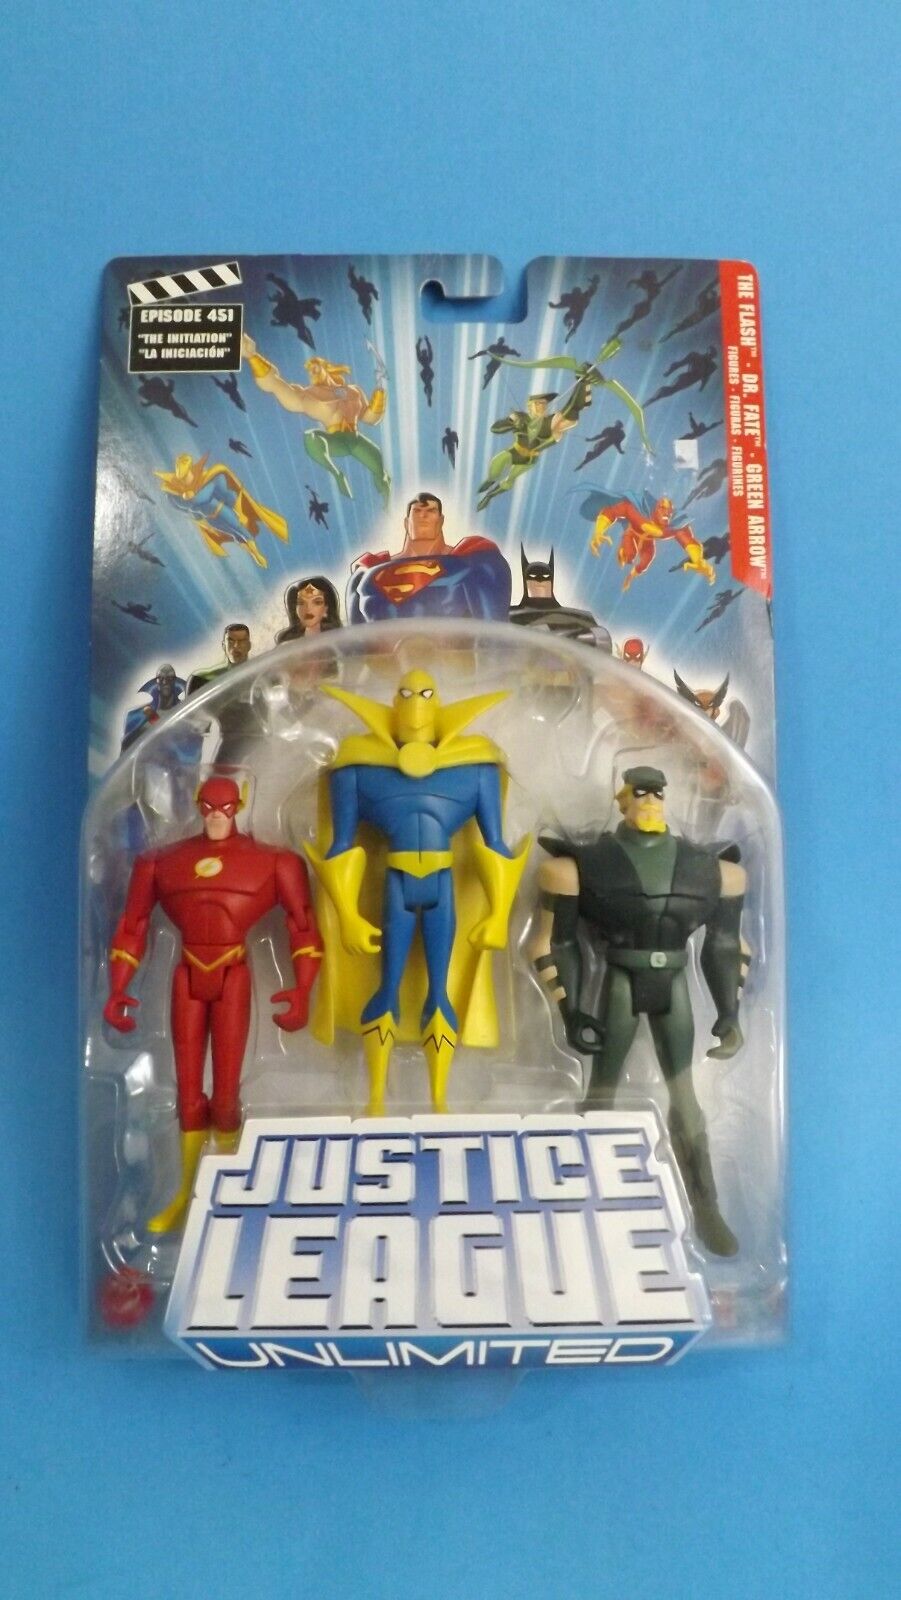 Justice League Unlimited Episode 451 Flash DR. Fate Green Arrow by Mattel